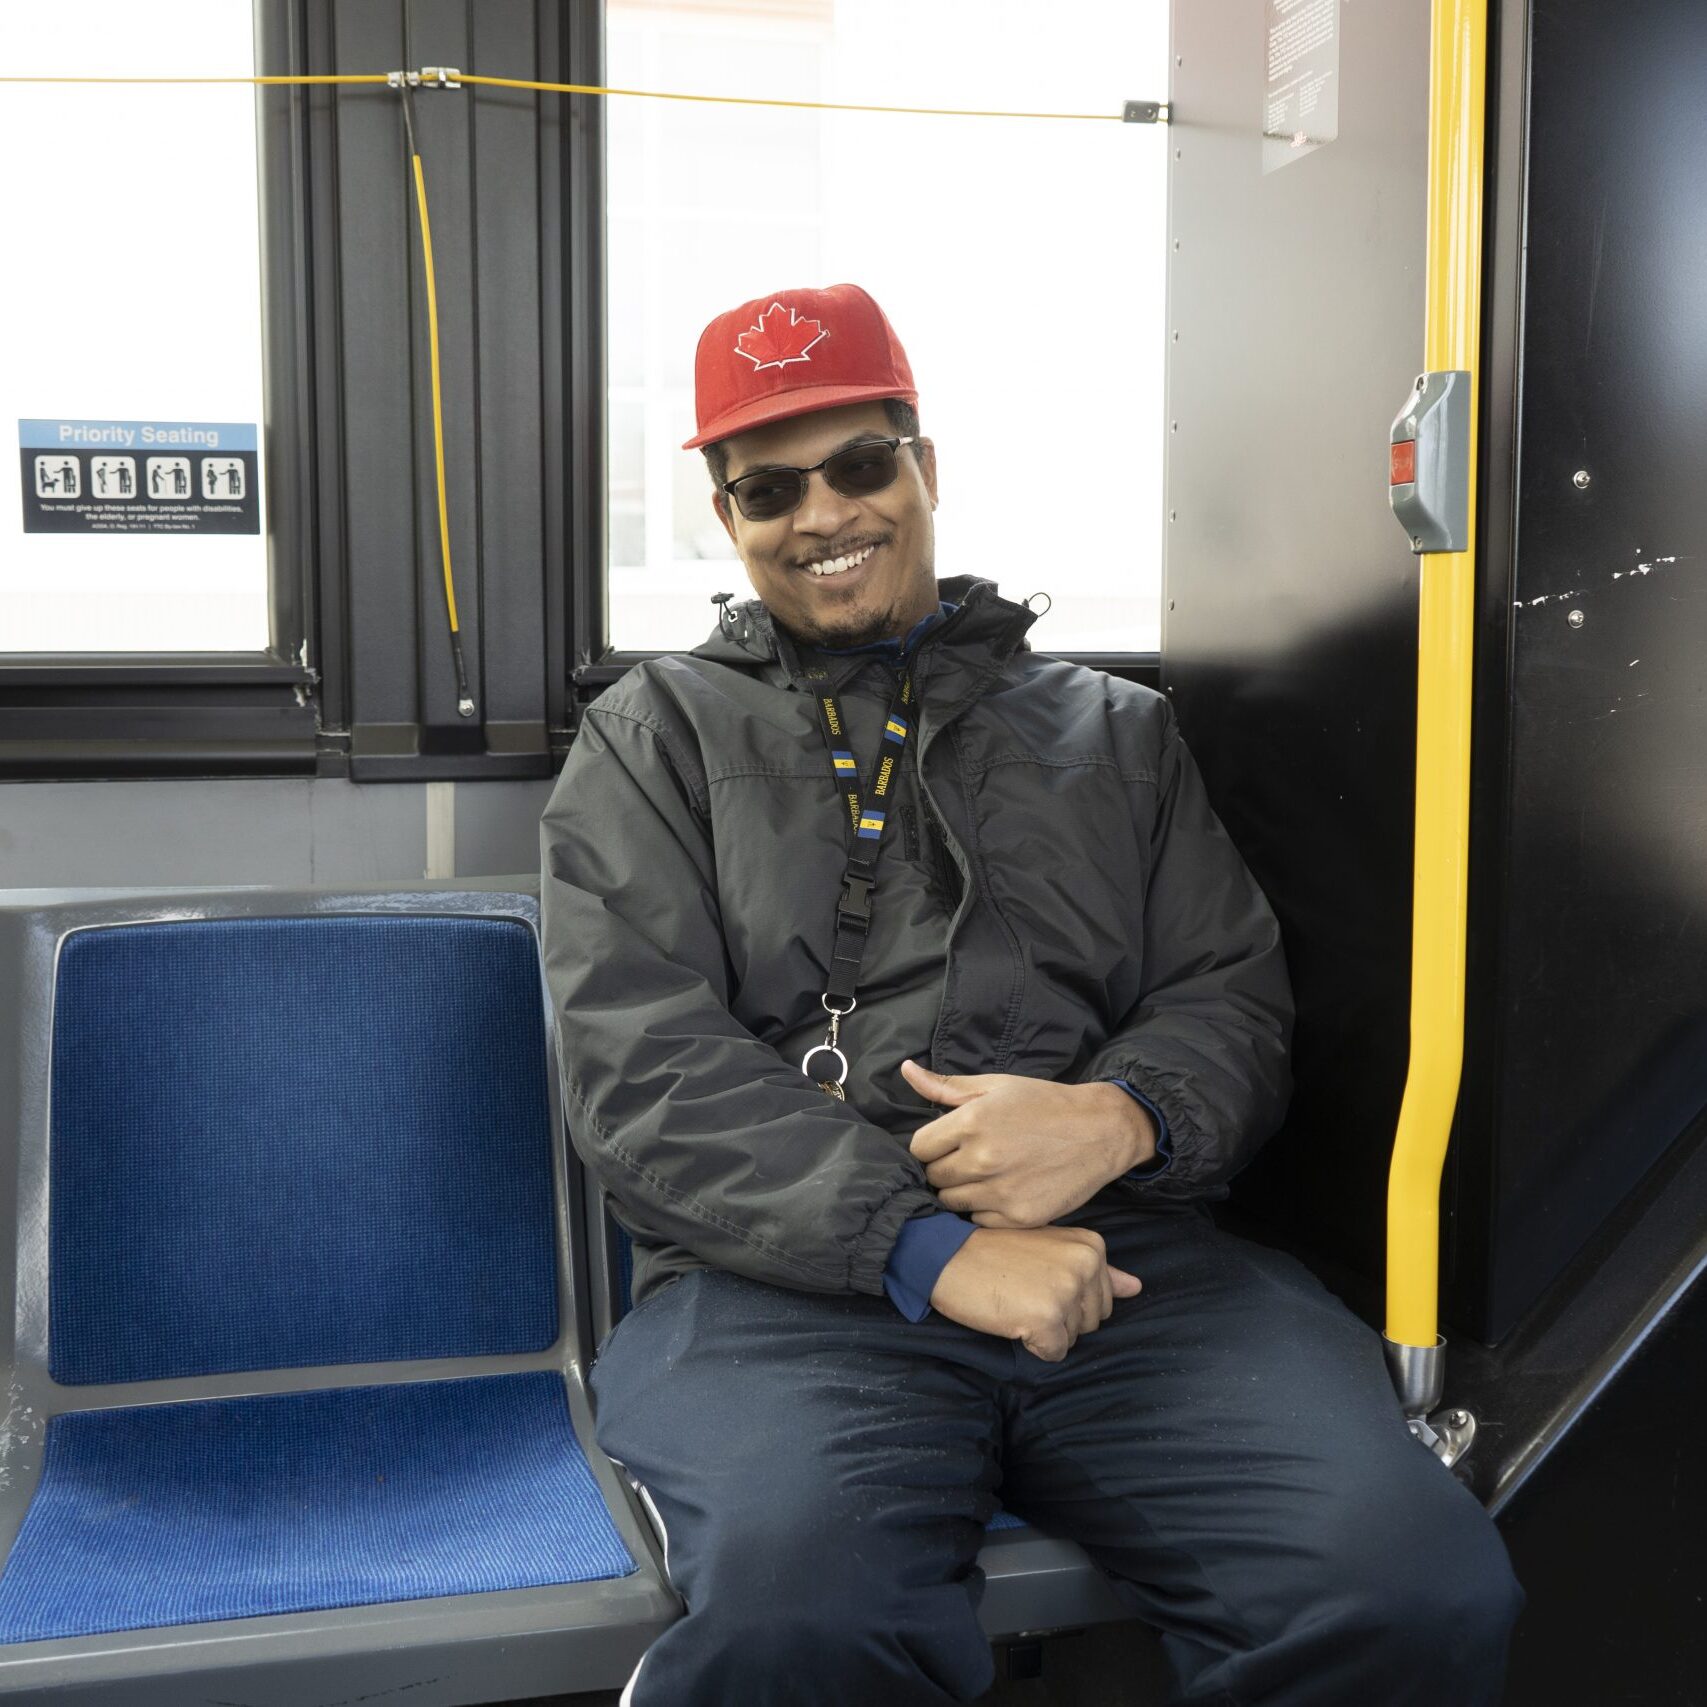 Josh smiling, sitting on a TTC bus seat facing inside the bus. Wearing sunglasses, a red maple leaf hat and a jacket.